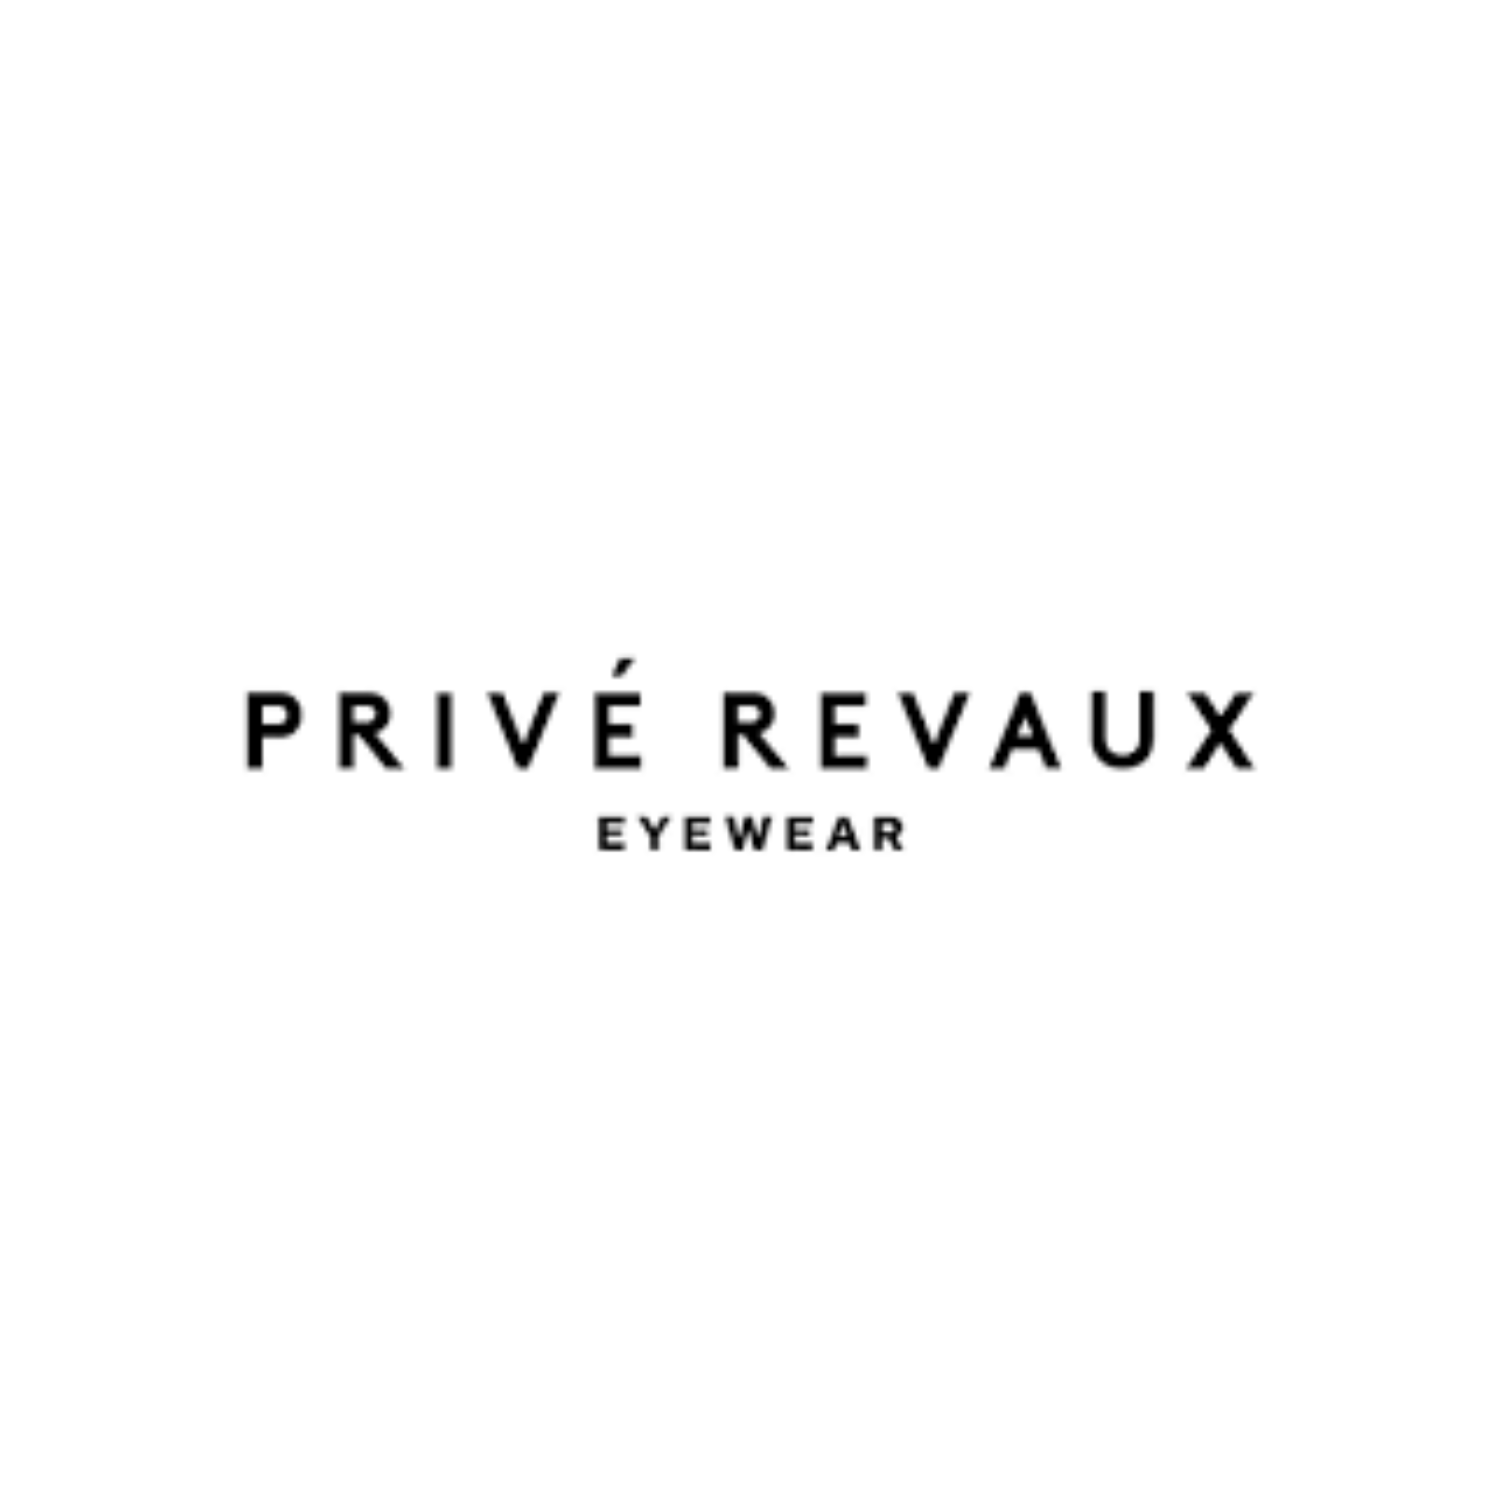 Centroptical Ophthalmic Opticians - prive